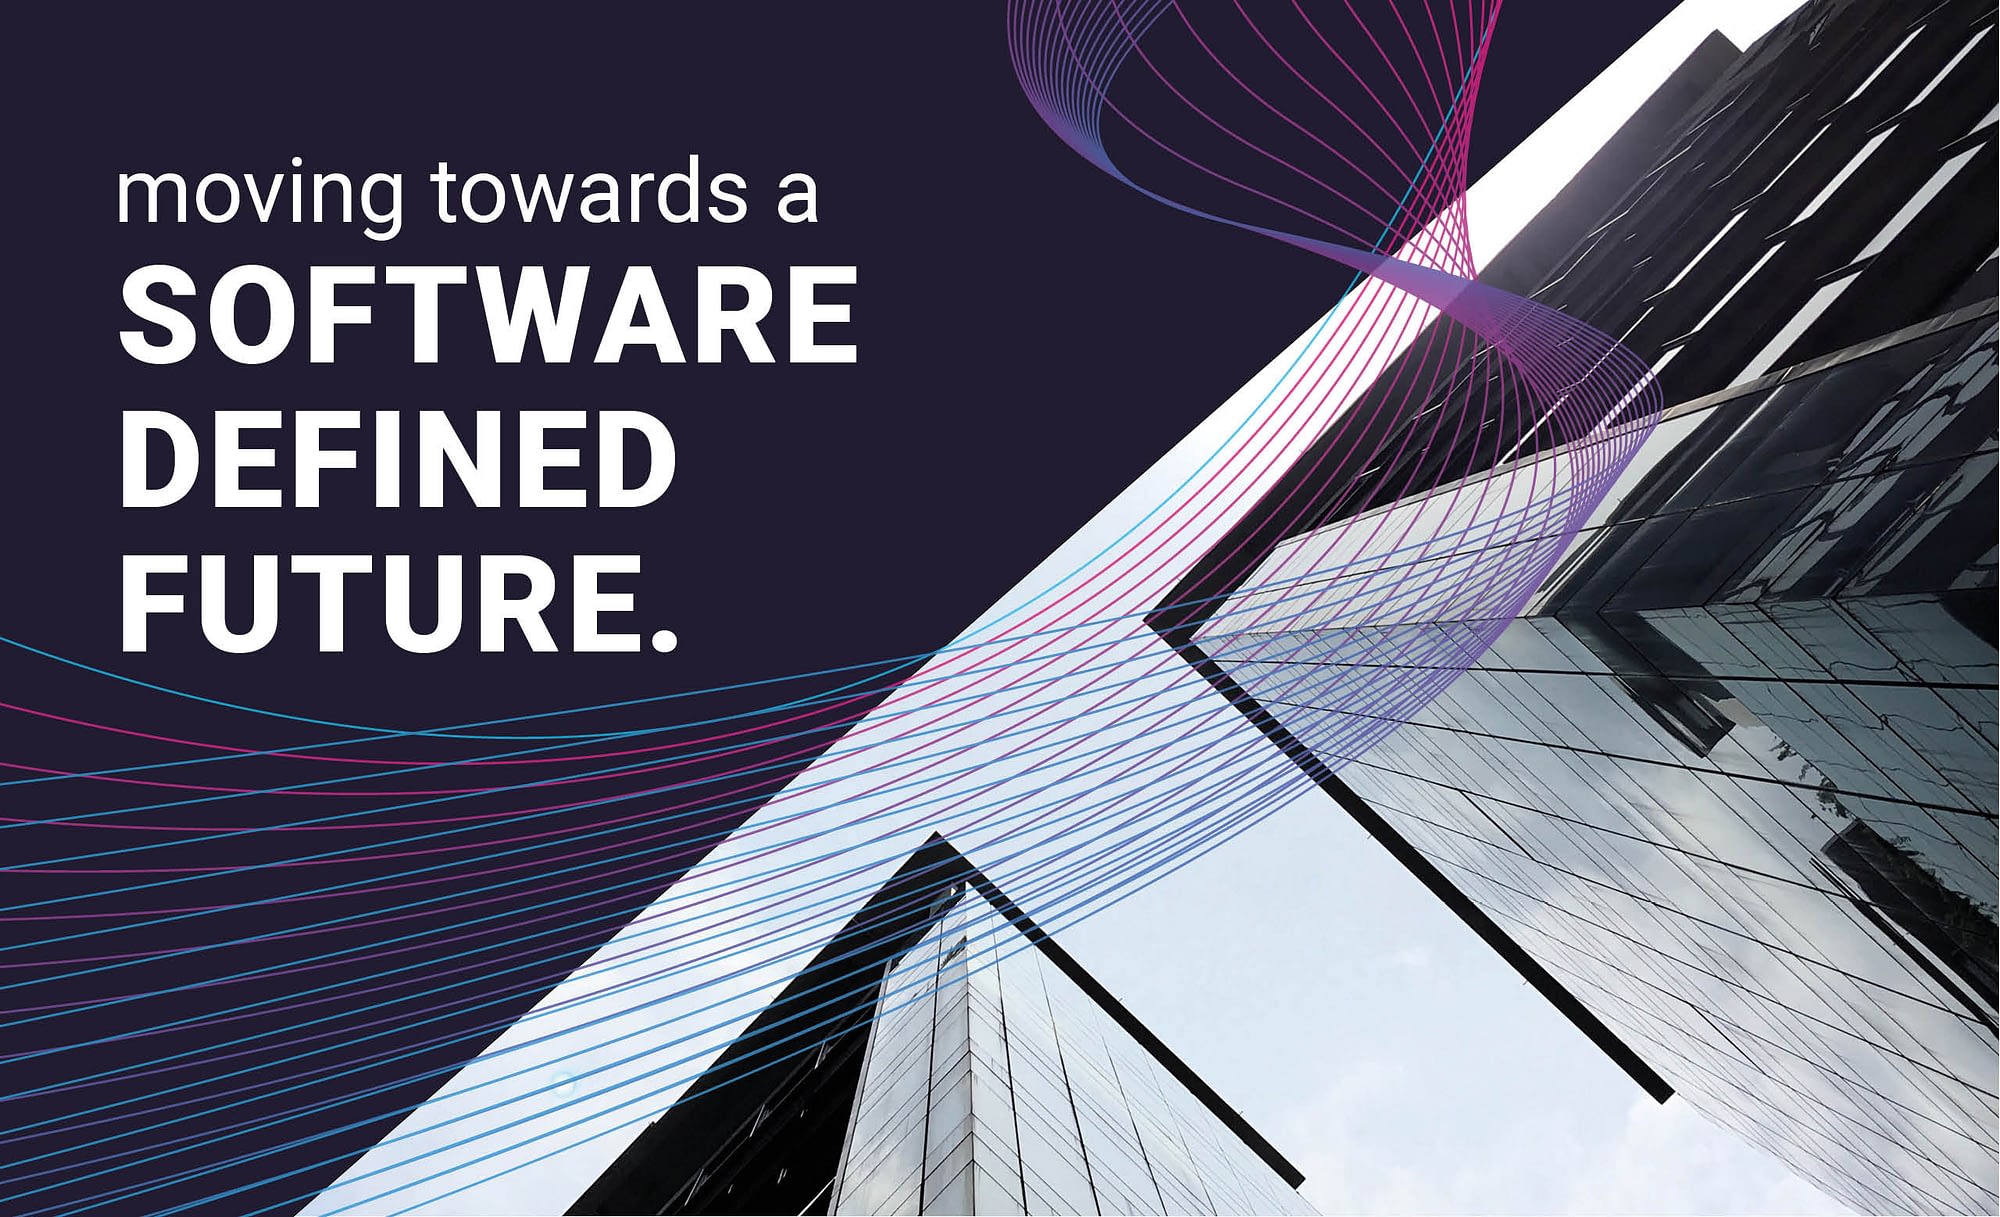 Moving towards a Software Defined future